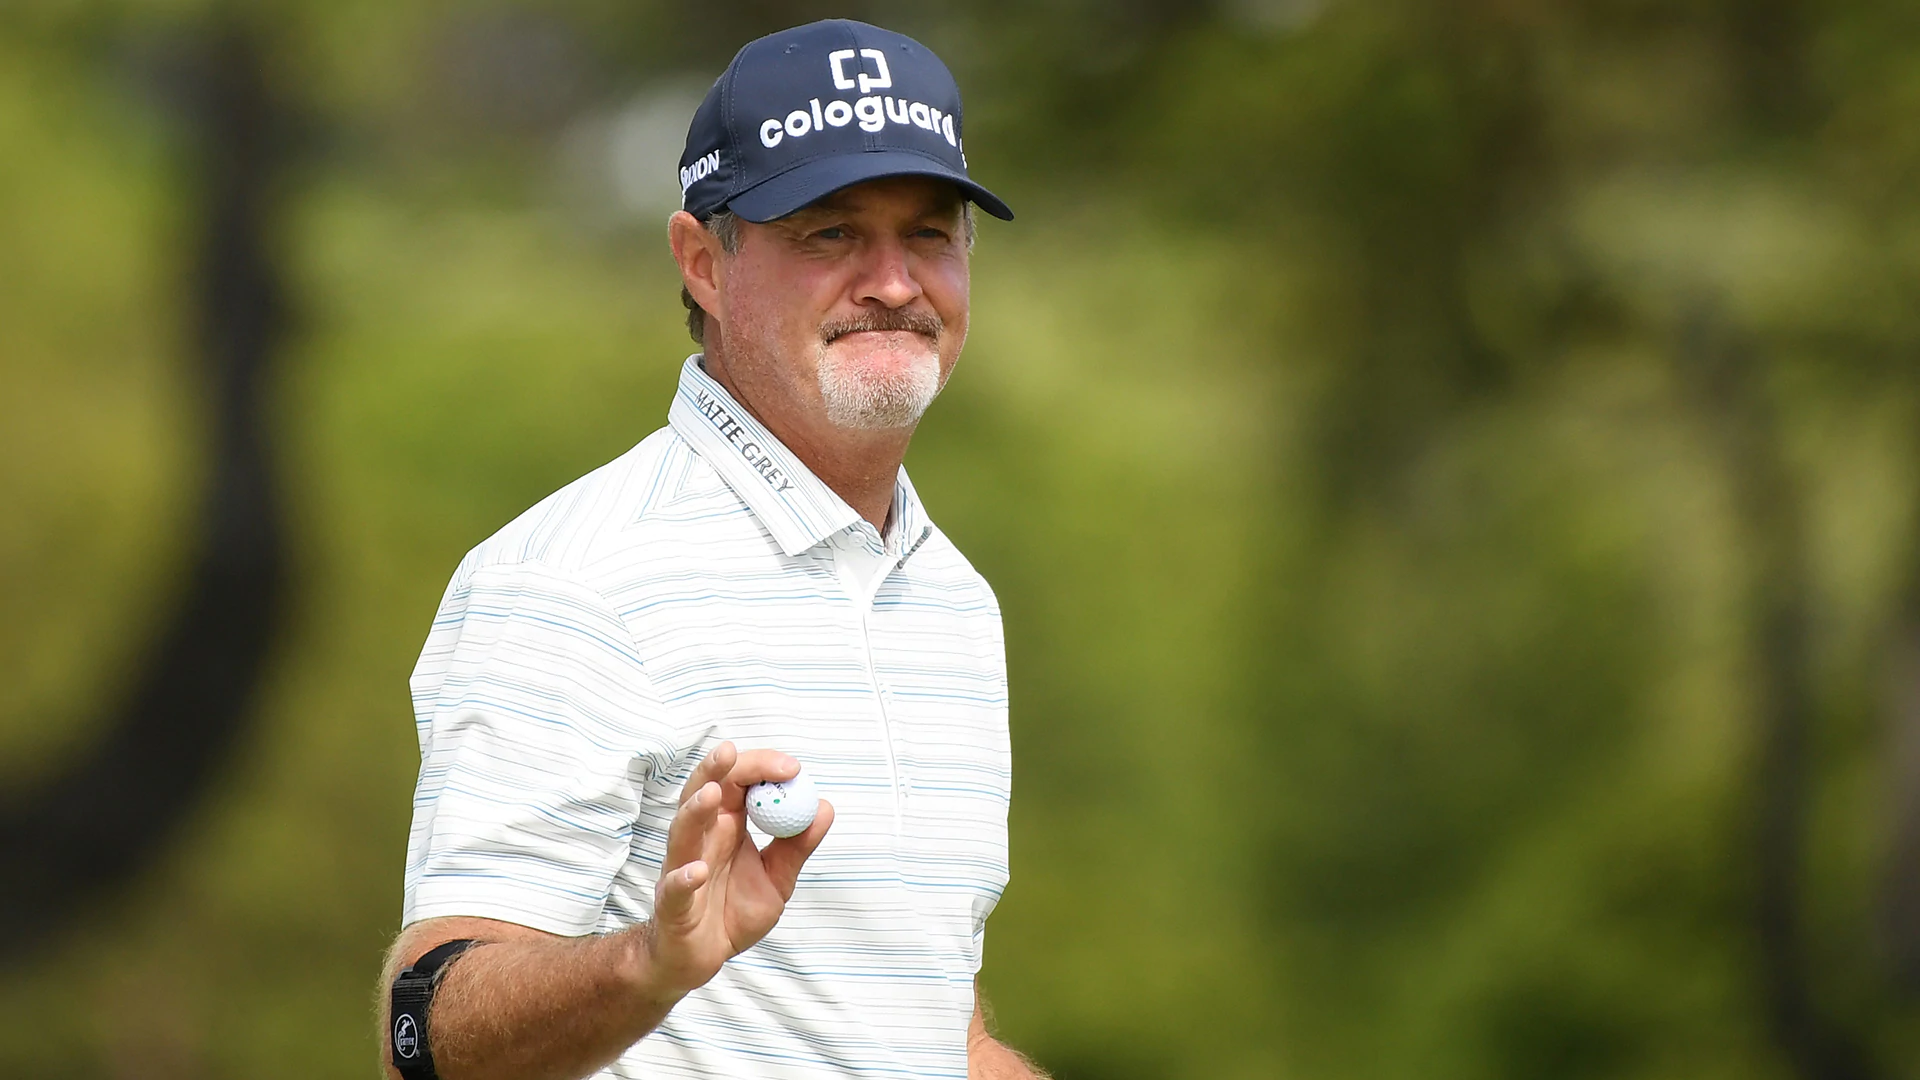 Jerry Kelly (72) leads as only player under par at difficult Senior Players